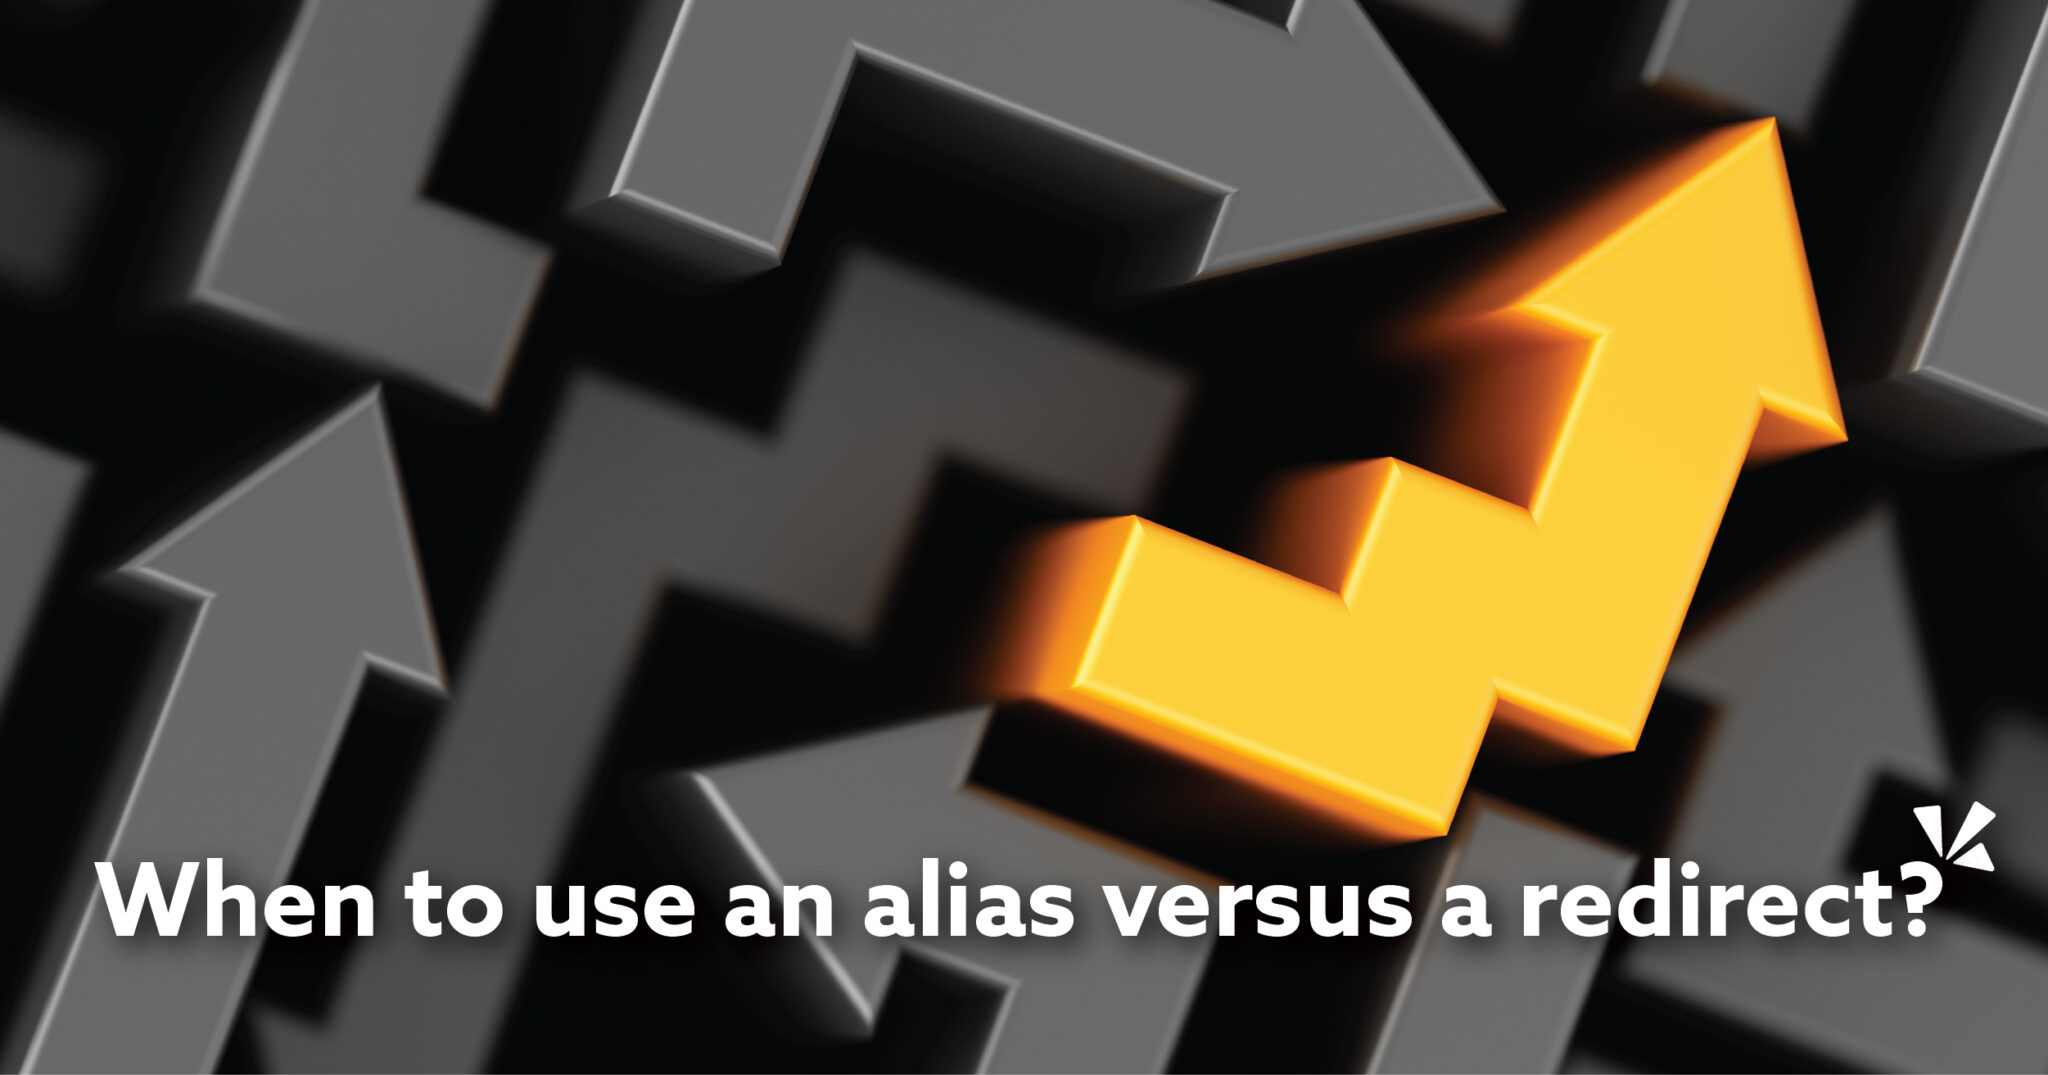 Bent orange arrow surrounded by black arrows with words "When to use an alias versus a redirect?" overlayed